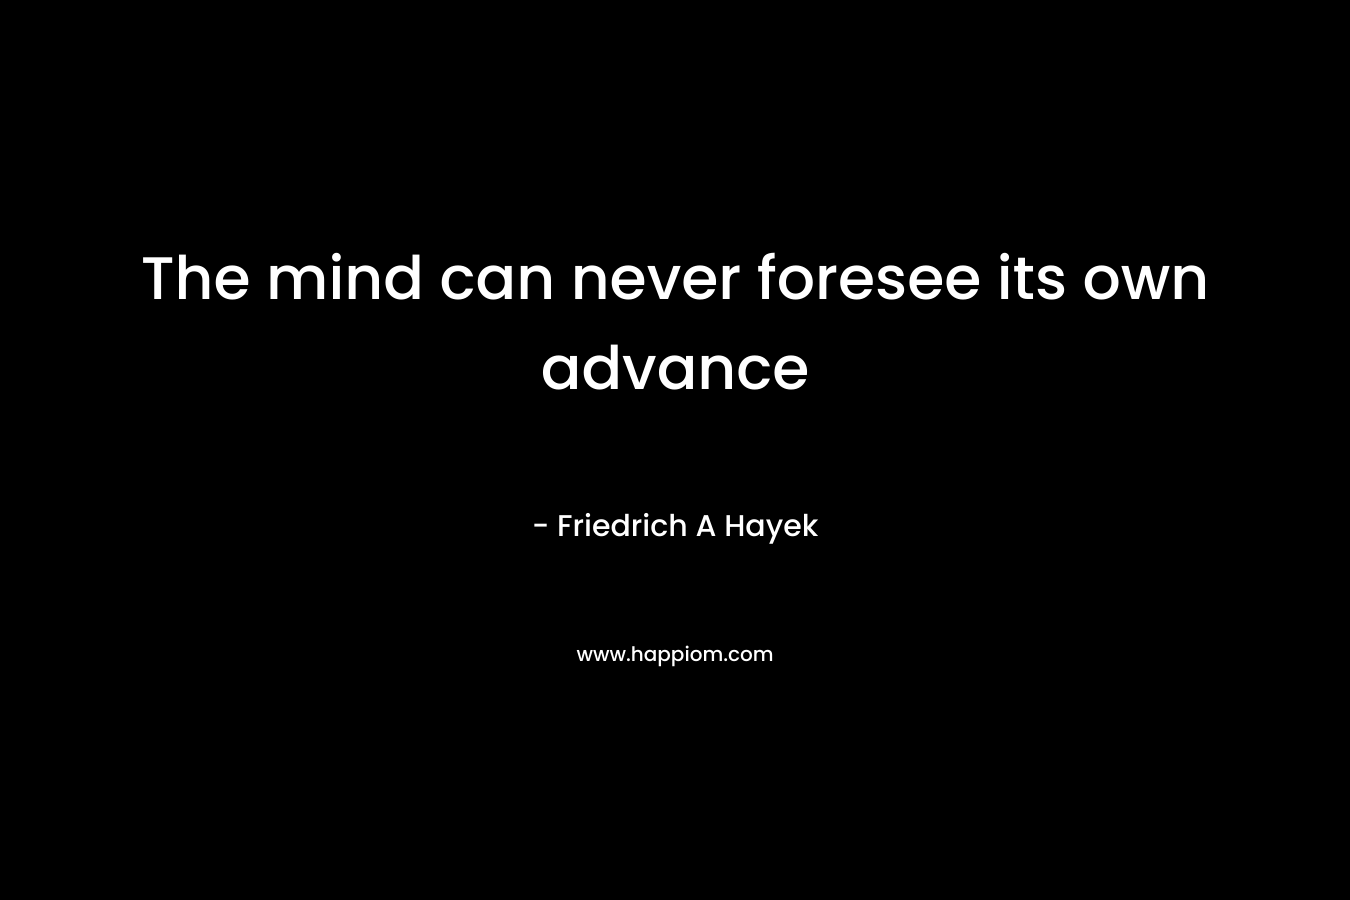 The mind can never foresee its own advance